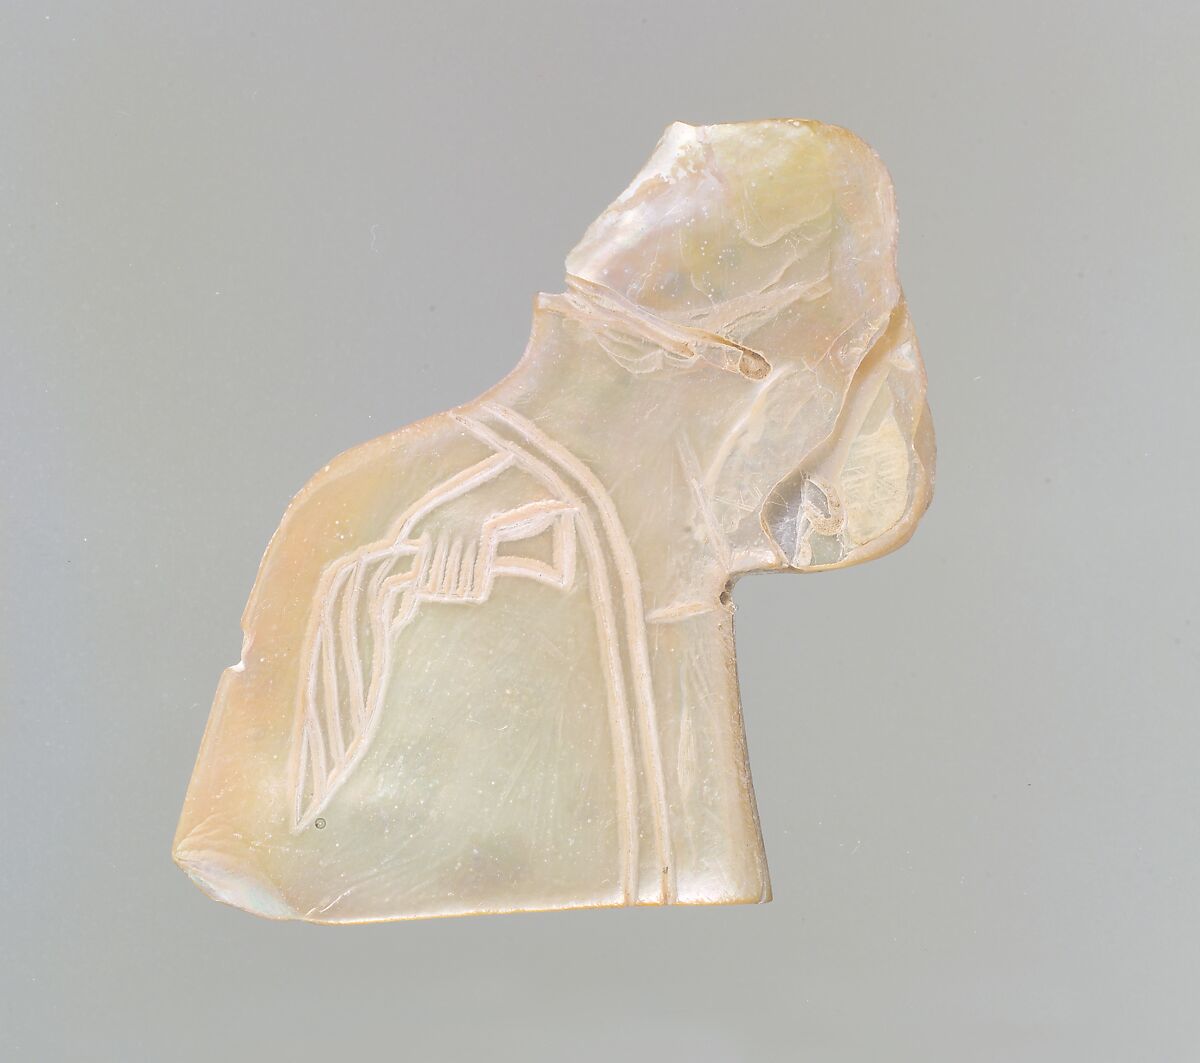 Inlay: banquet scene with a seated figure holding a palm frond, Shell, Sumerian 